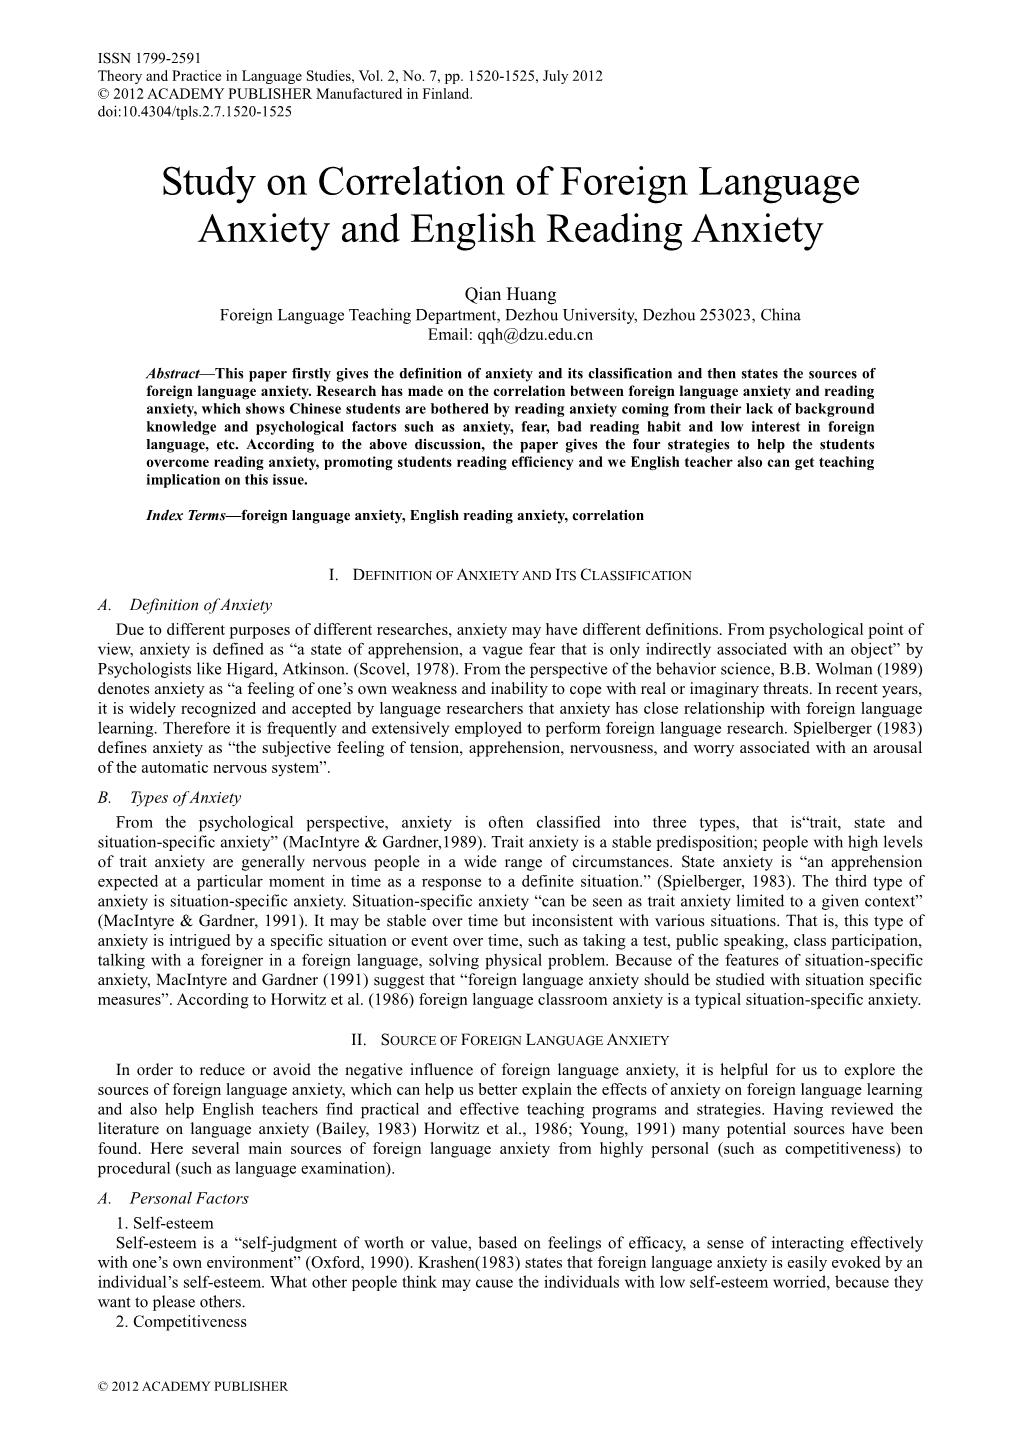 Study on Correlation of Foreign Language Anxiety and English Reading Anxiety